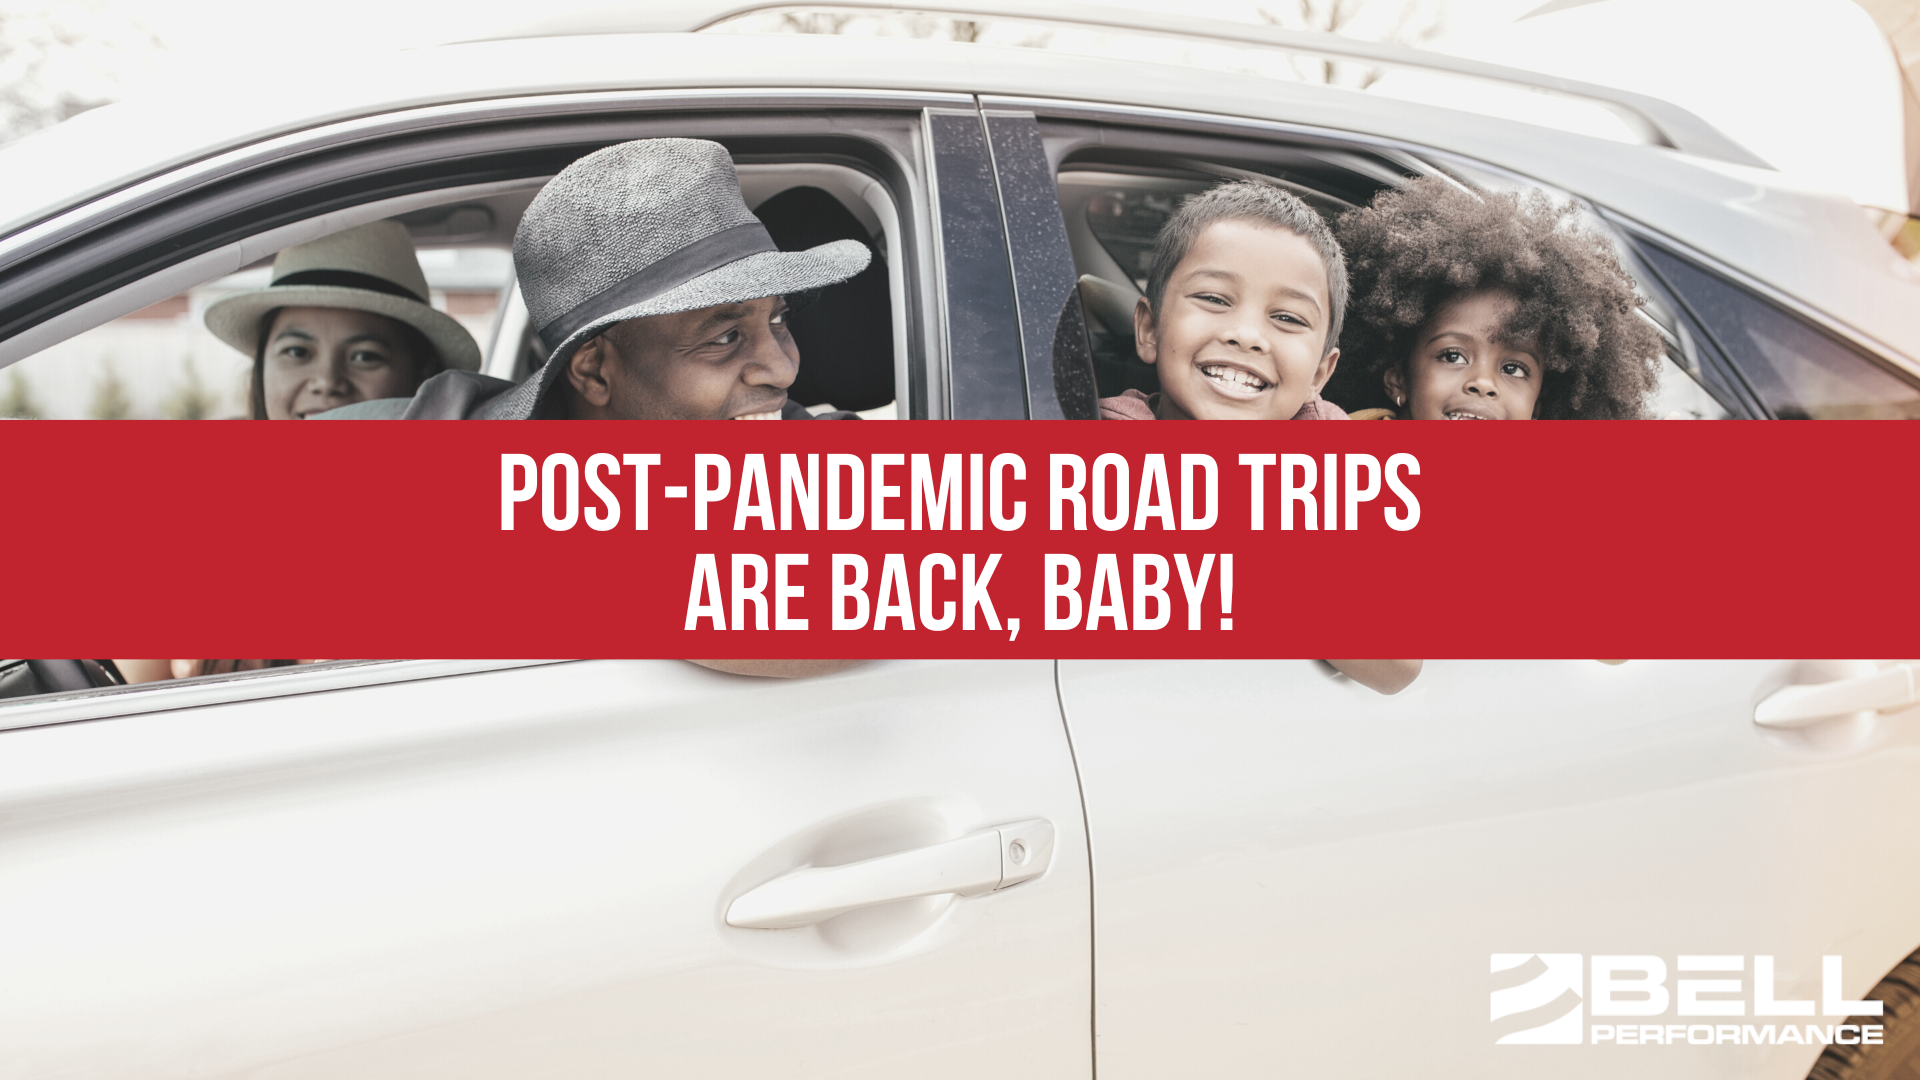 Post-Pandemic road trips are back, baby!